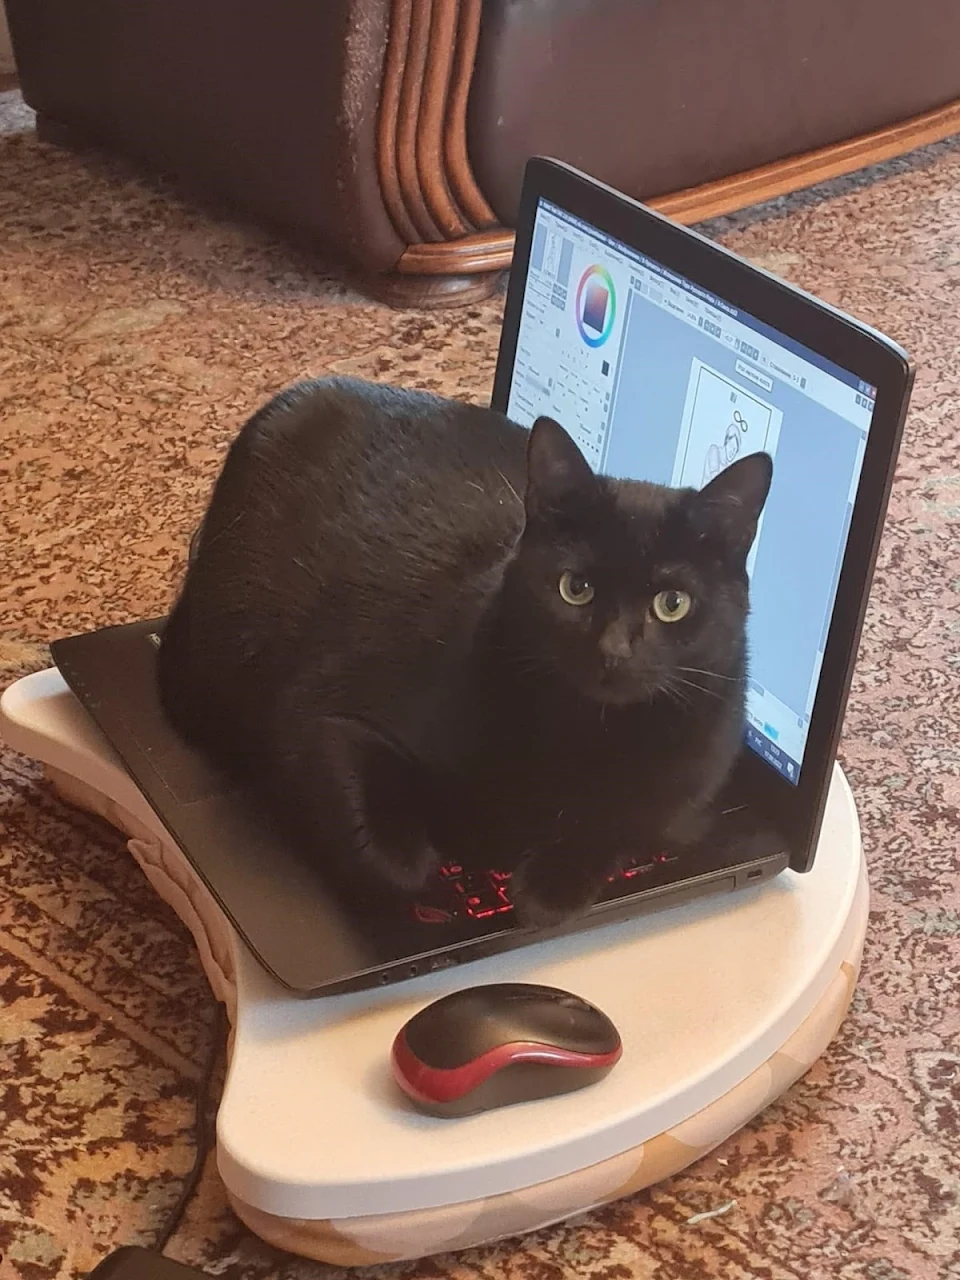 There is a computer mouse, and this is a computer cat